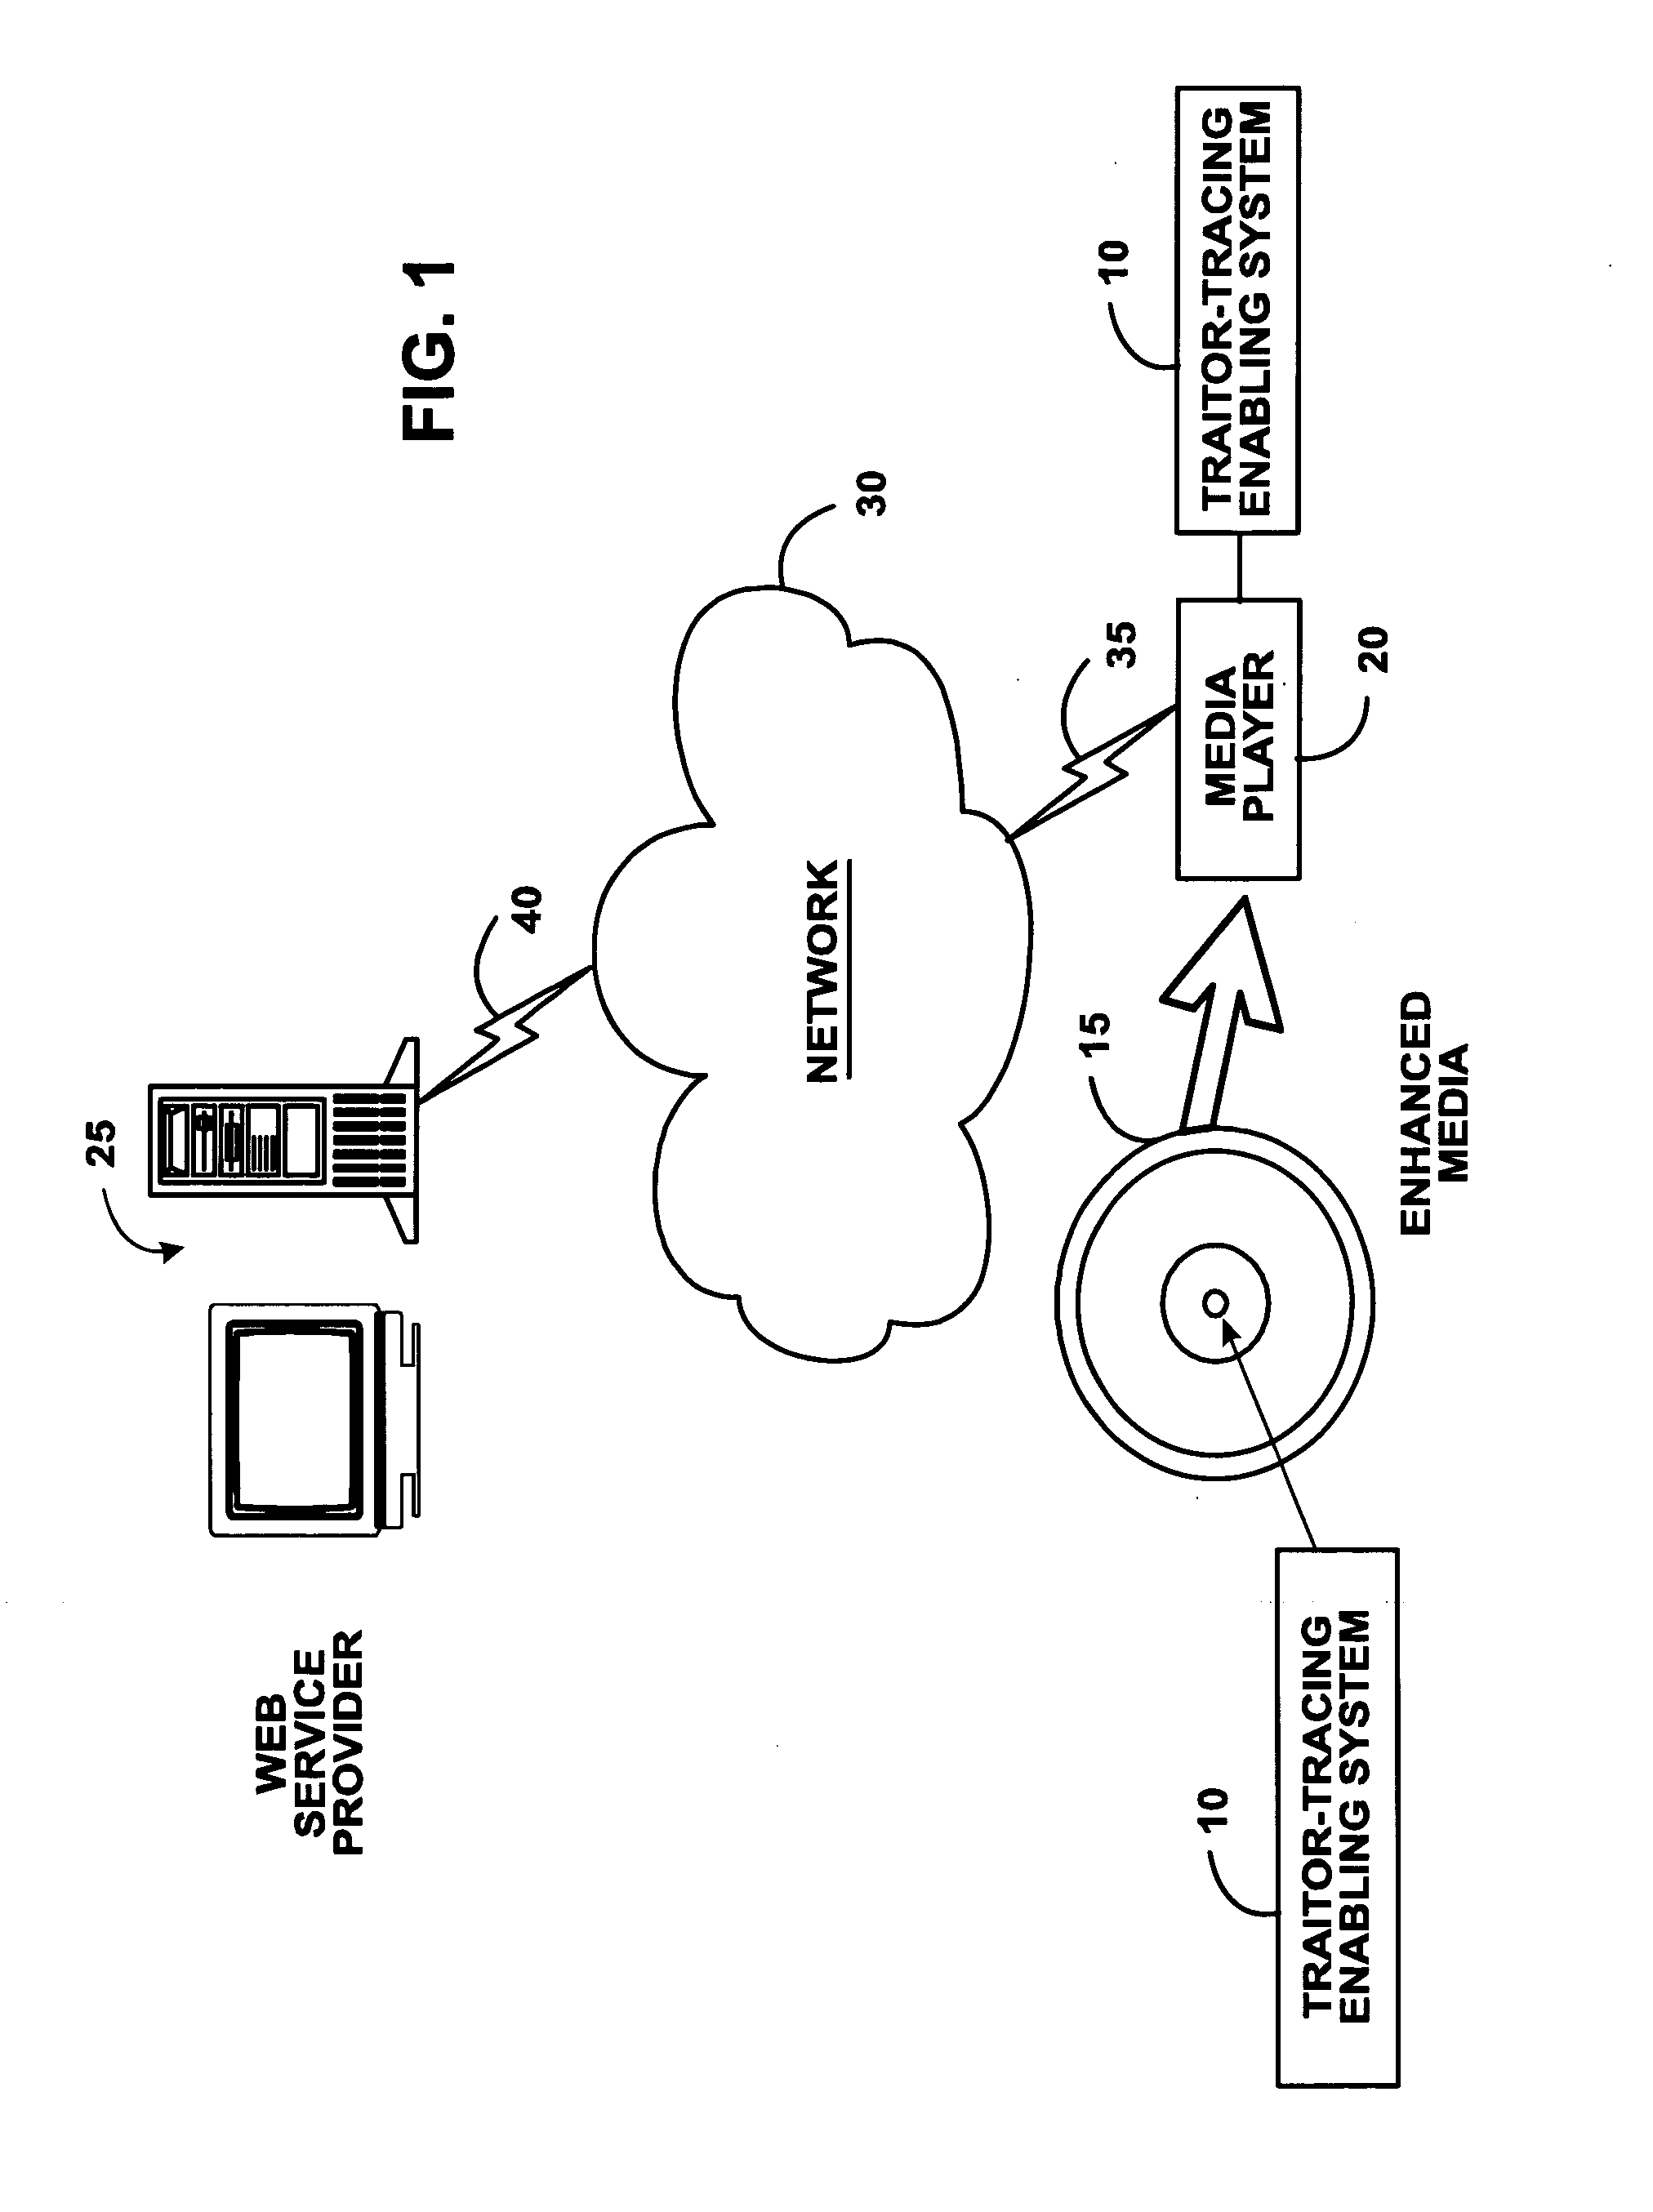 System and method for assigning sequence keys to a media player to enable flexible traitor tracing